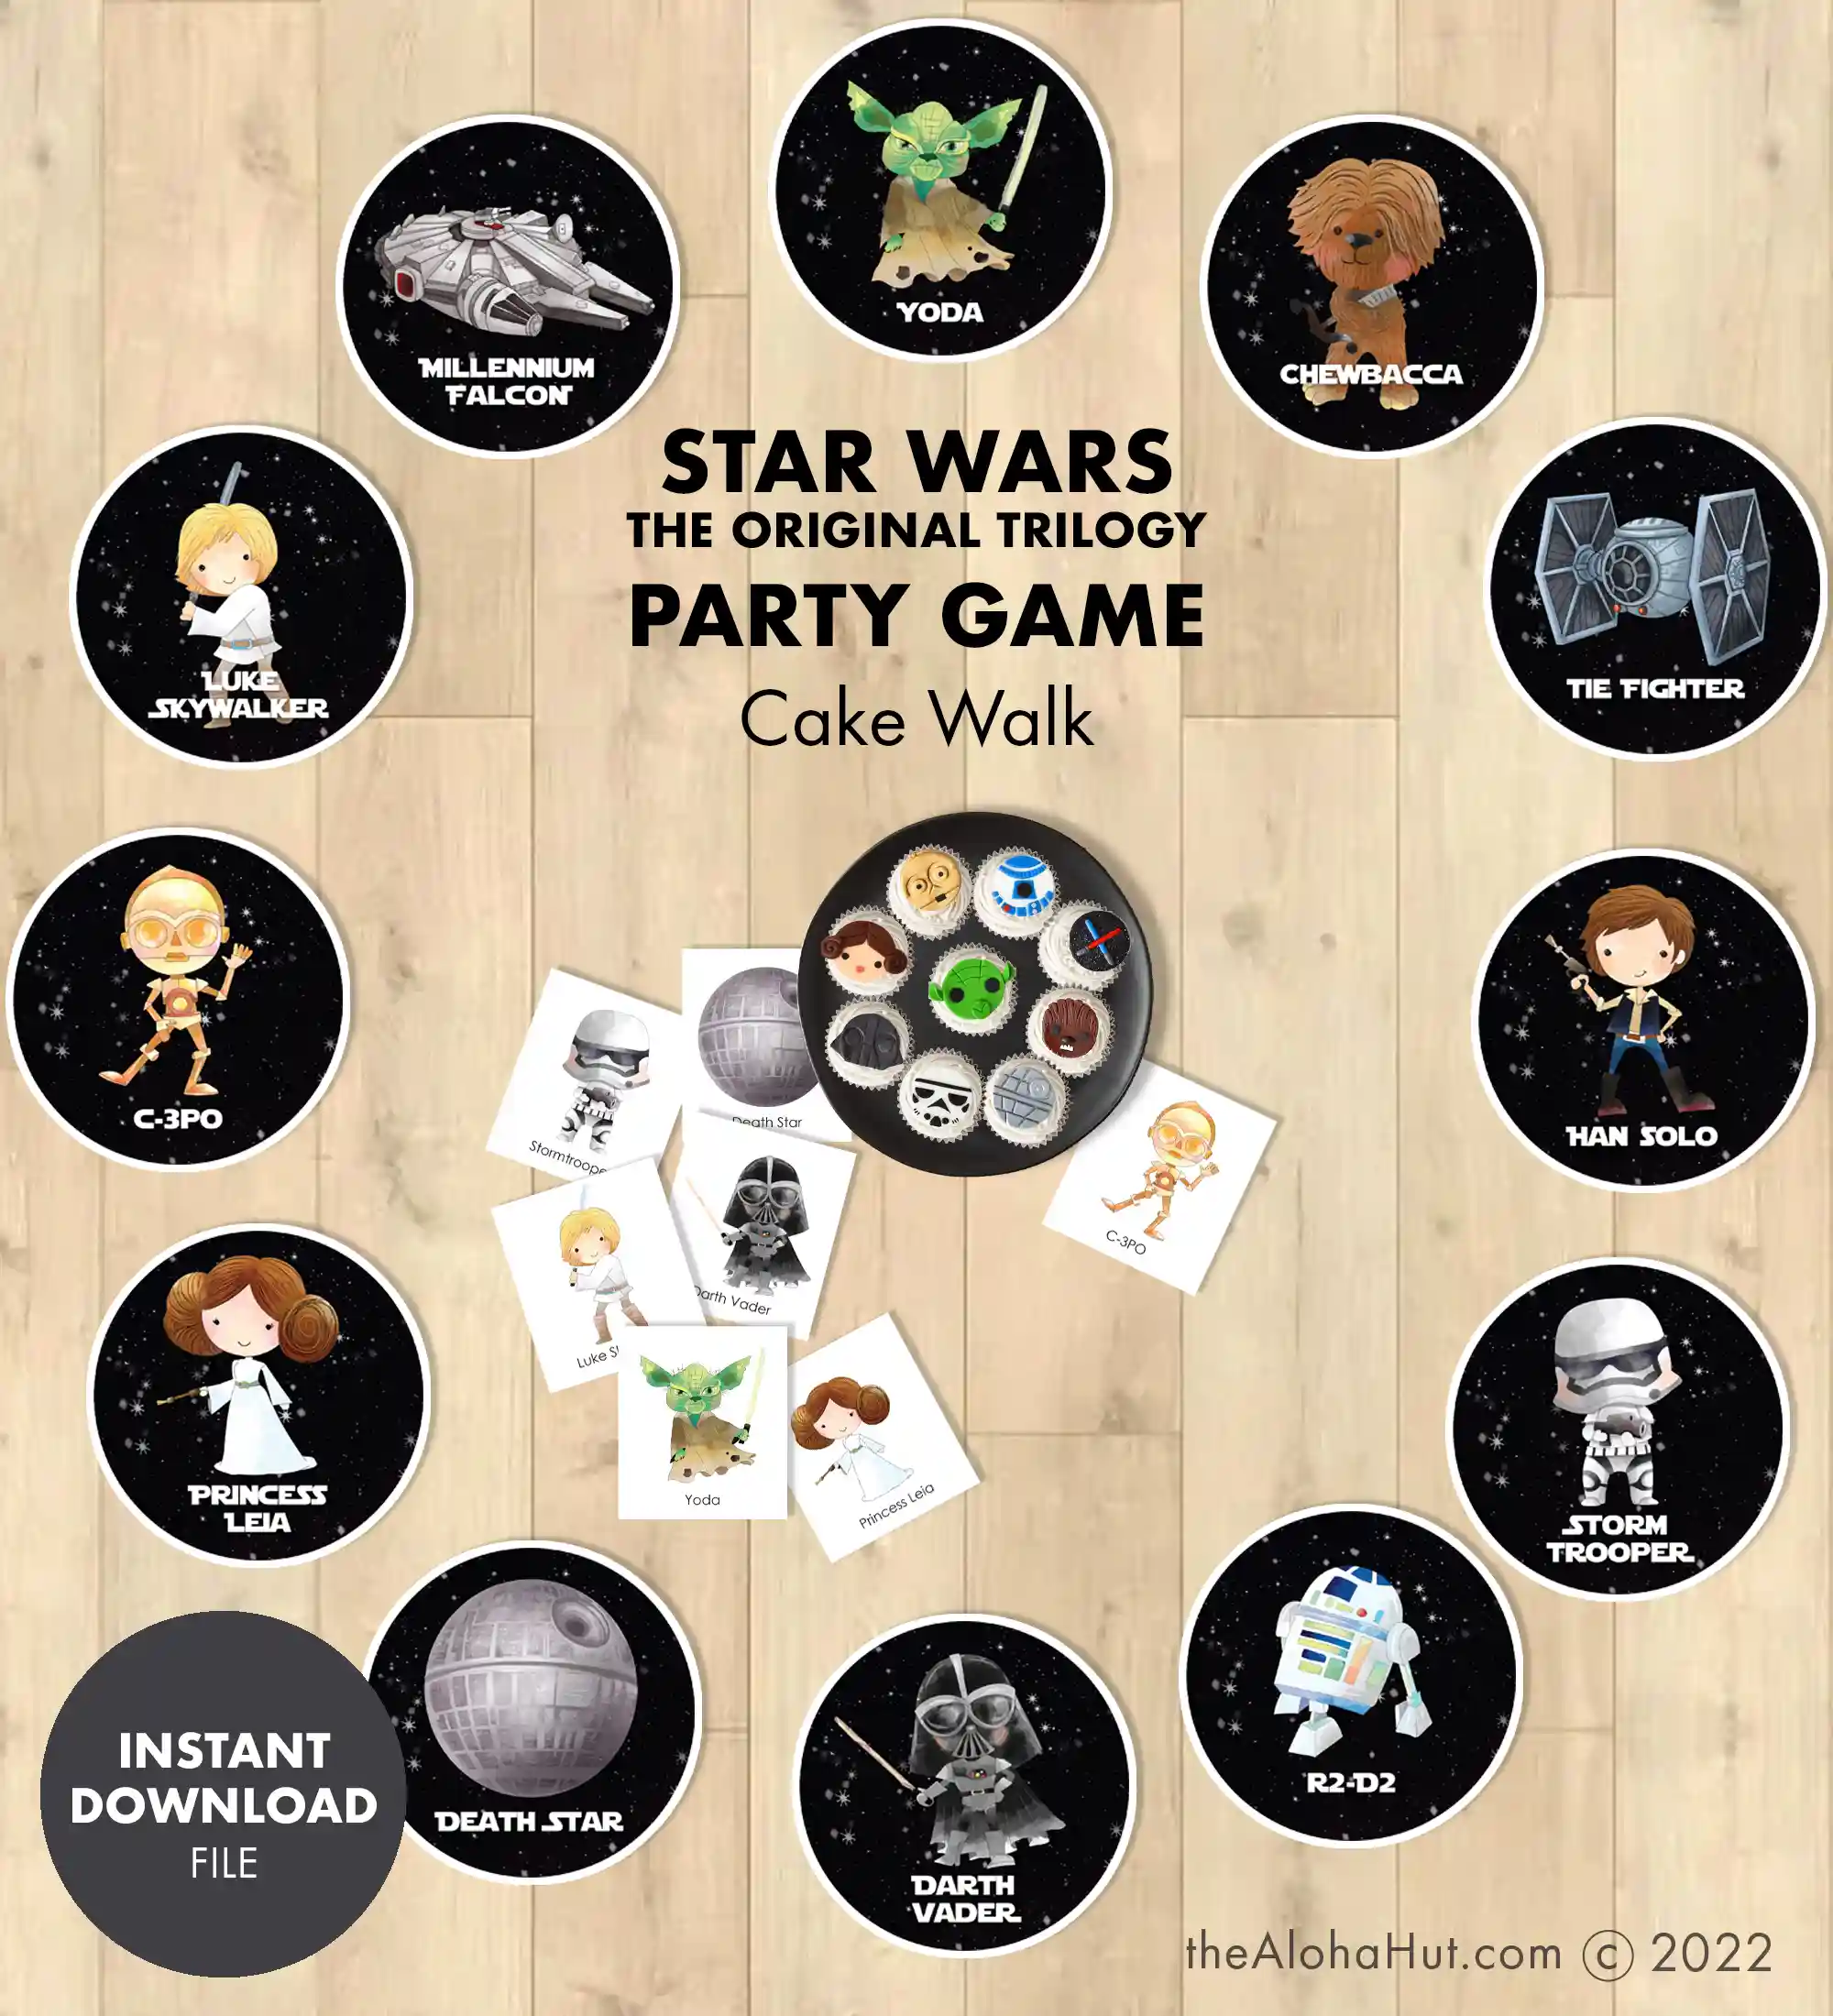 Star Wars party ideas, activities, birthday party games, decorations, and prints. Ideas and tips and tricks for throwing the best Star Wars themed kids birthday party, baby shower, or one with the force celebration. Includes Star Wars printable games, decorations (cupcake toppers, banners, gift tags, characters) and Star Wars party games (BINGO, scavenger hunt, pin the lightsaber on Yoda or Darth Vader). Cupcake walk or cake walk game.